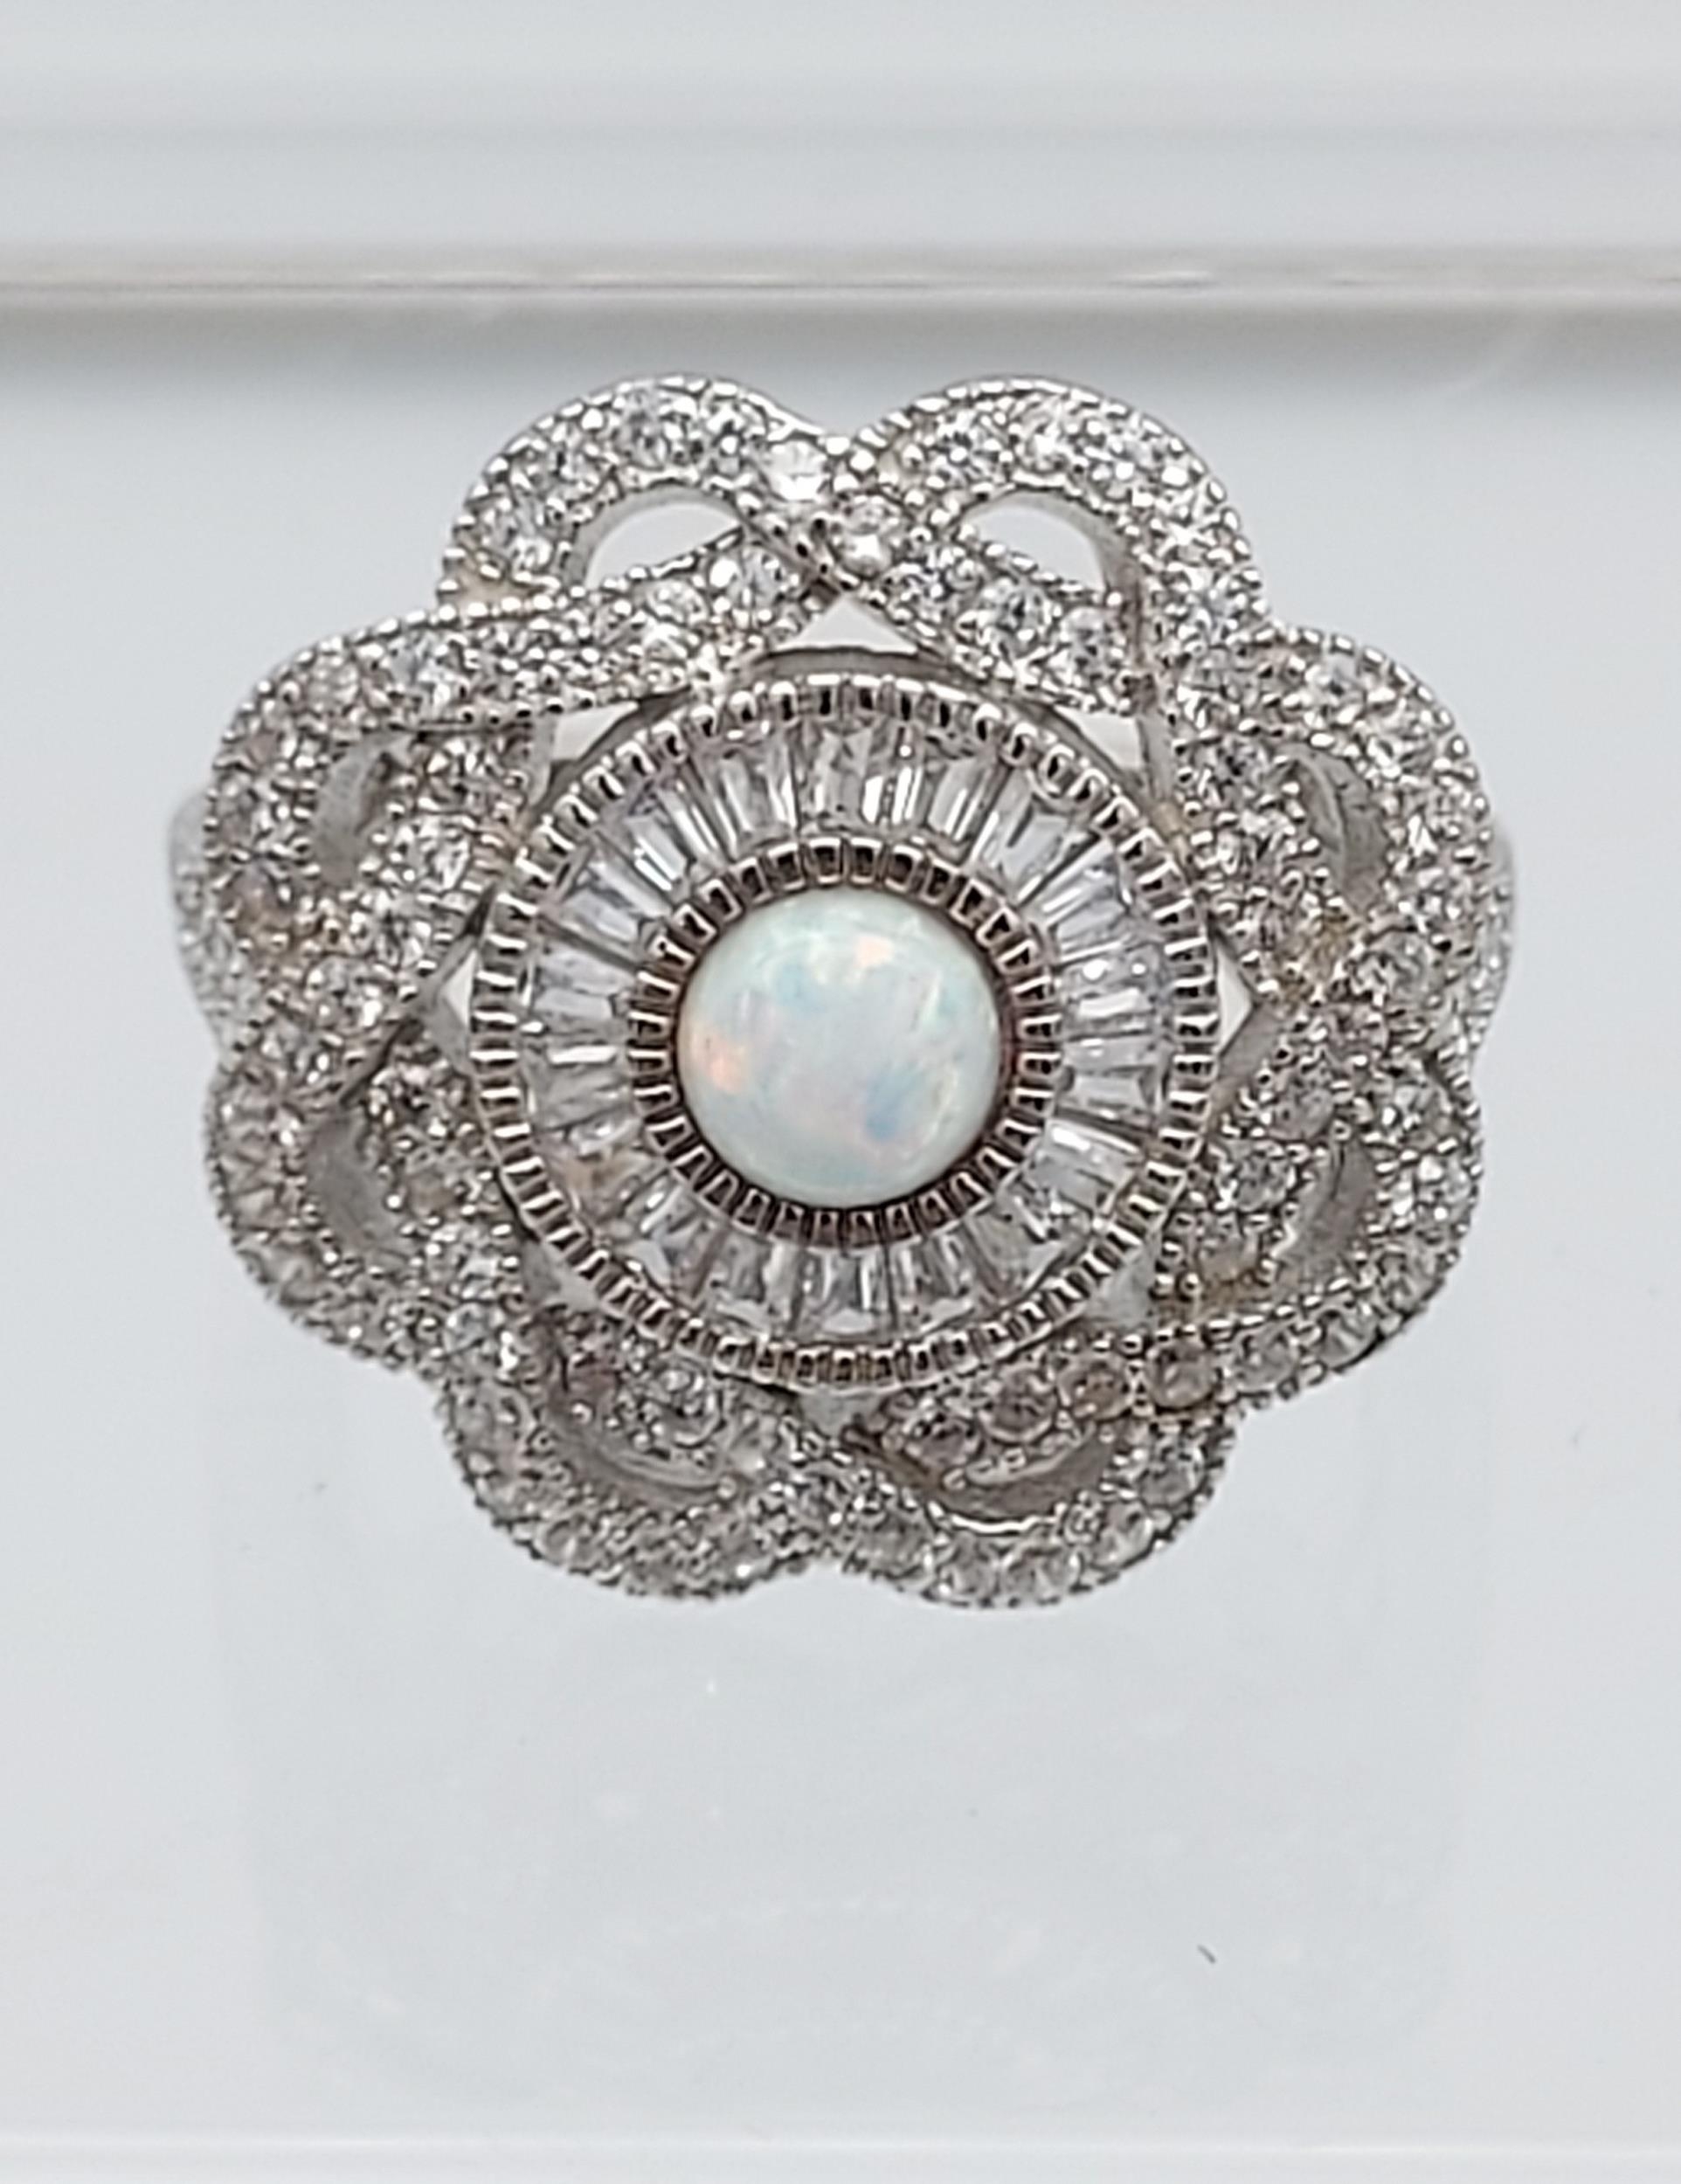 A silver CZ & opal paneled ring [7.12g] - Image 2 of 4